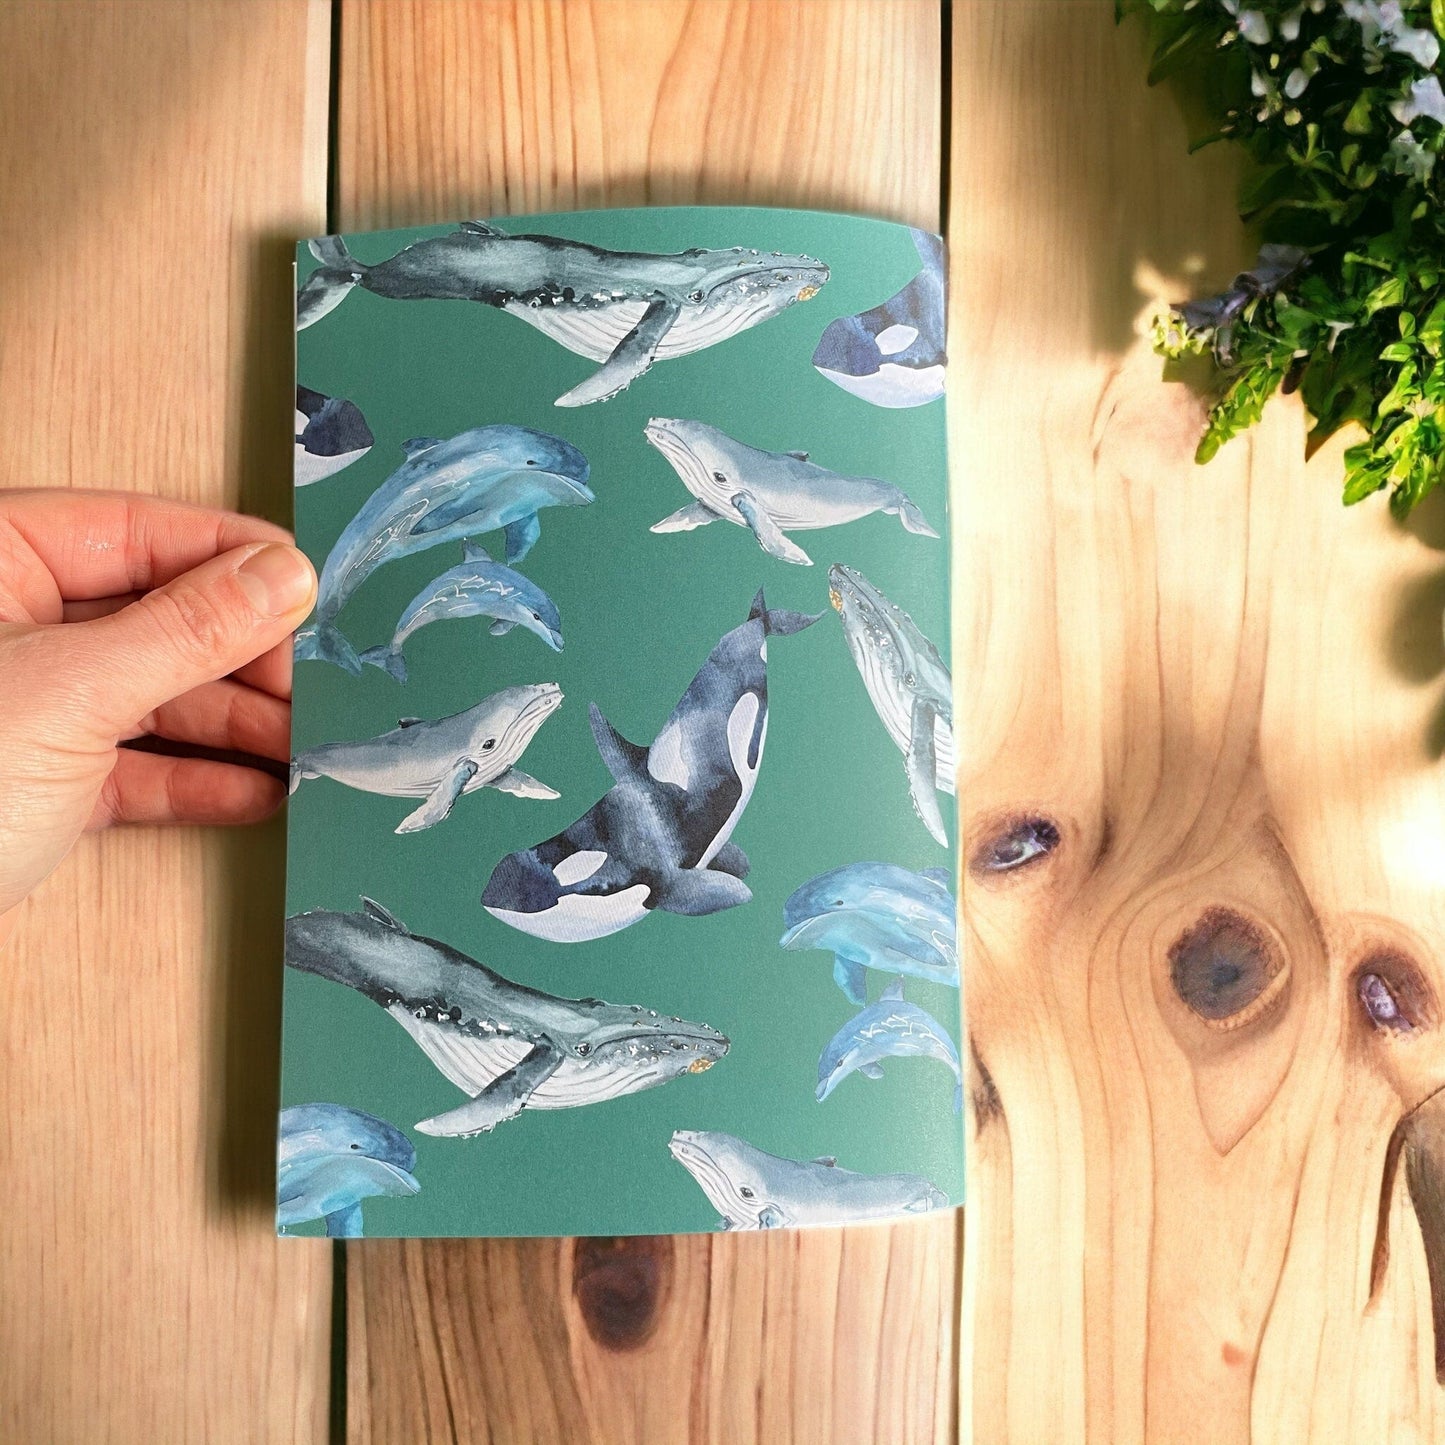 And Hope Designs Notebook Sealife A5 lined notebook